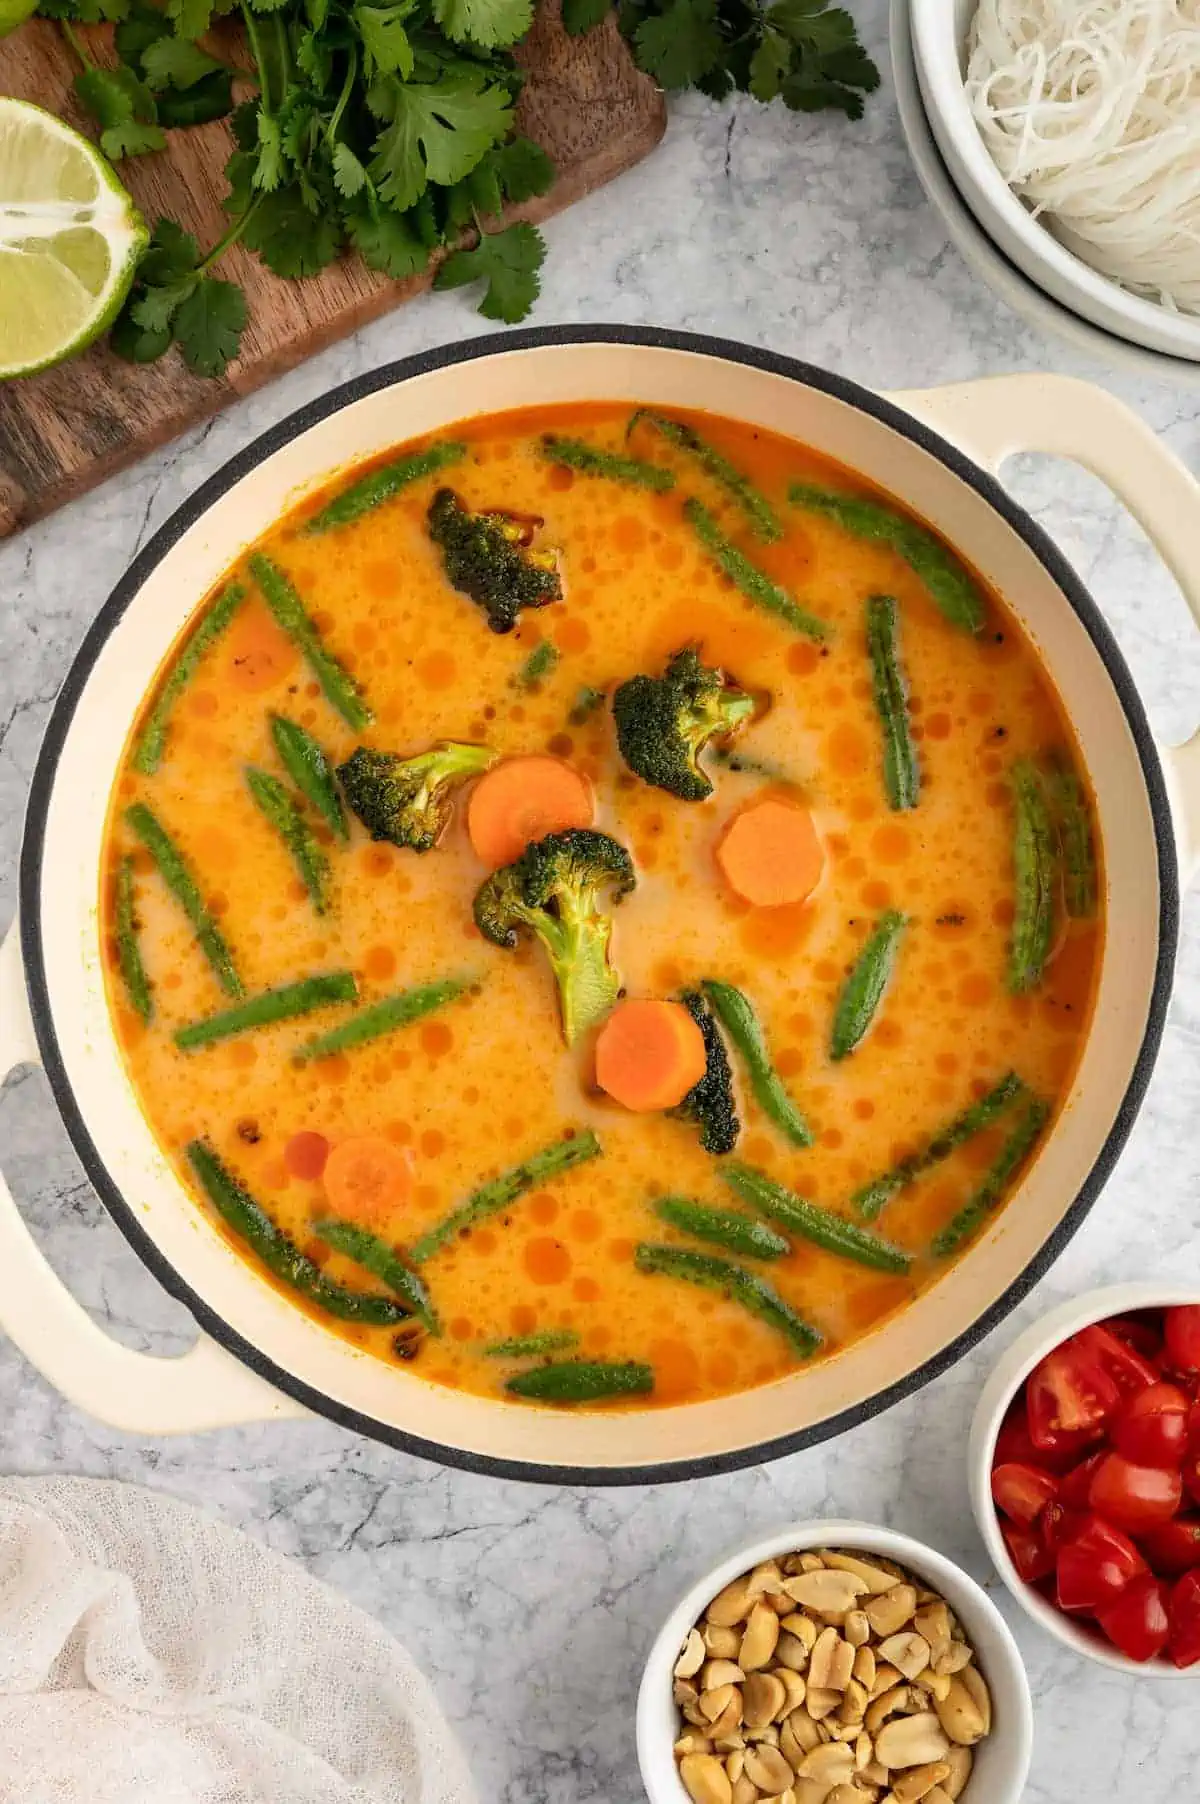 A pot with broth, vegetables, and coconut milk simmering.